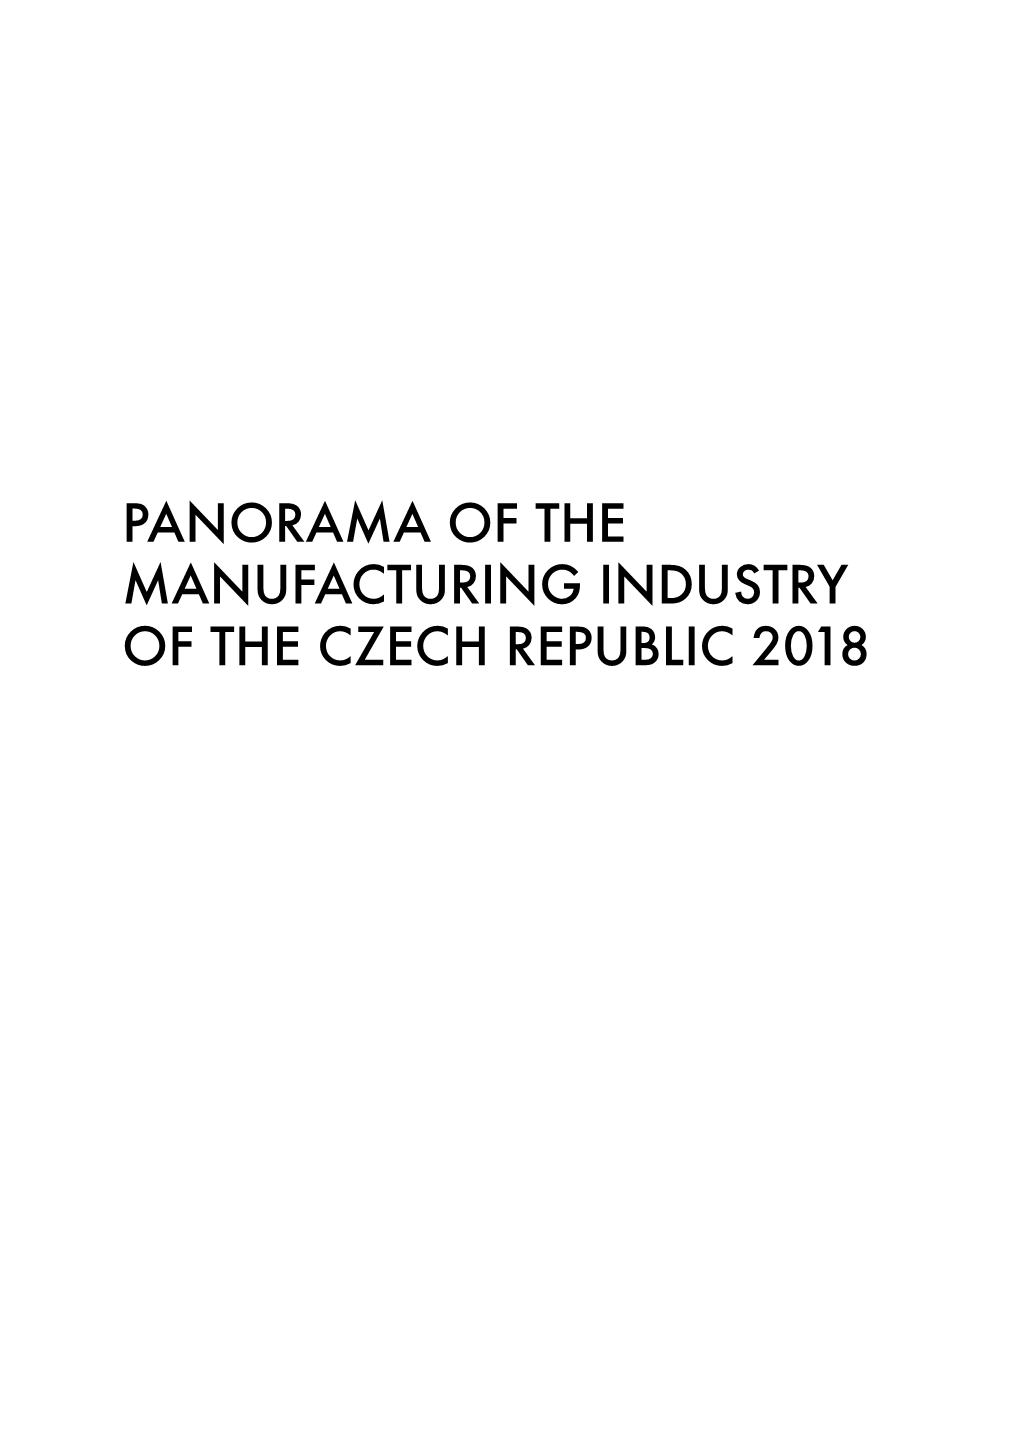 Panorama of the Manufacturing Industry of the Czech Republic 2018 Isbn 978-80-906942-7-9 Introduction by the Minister